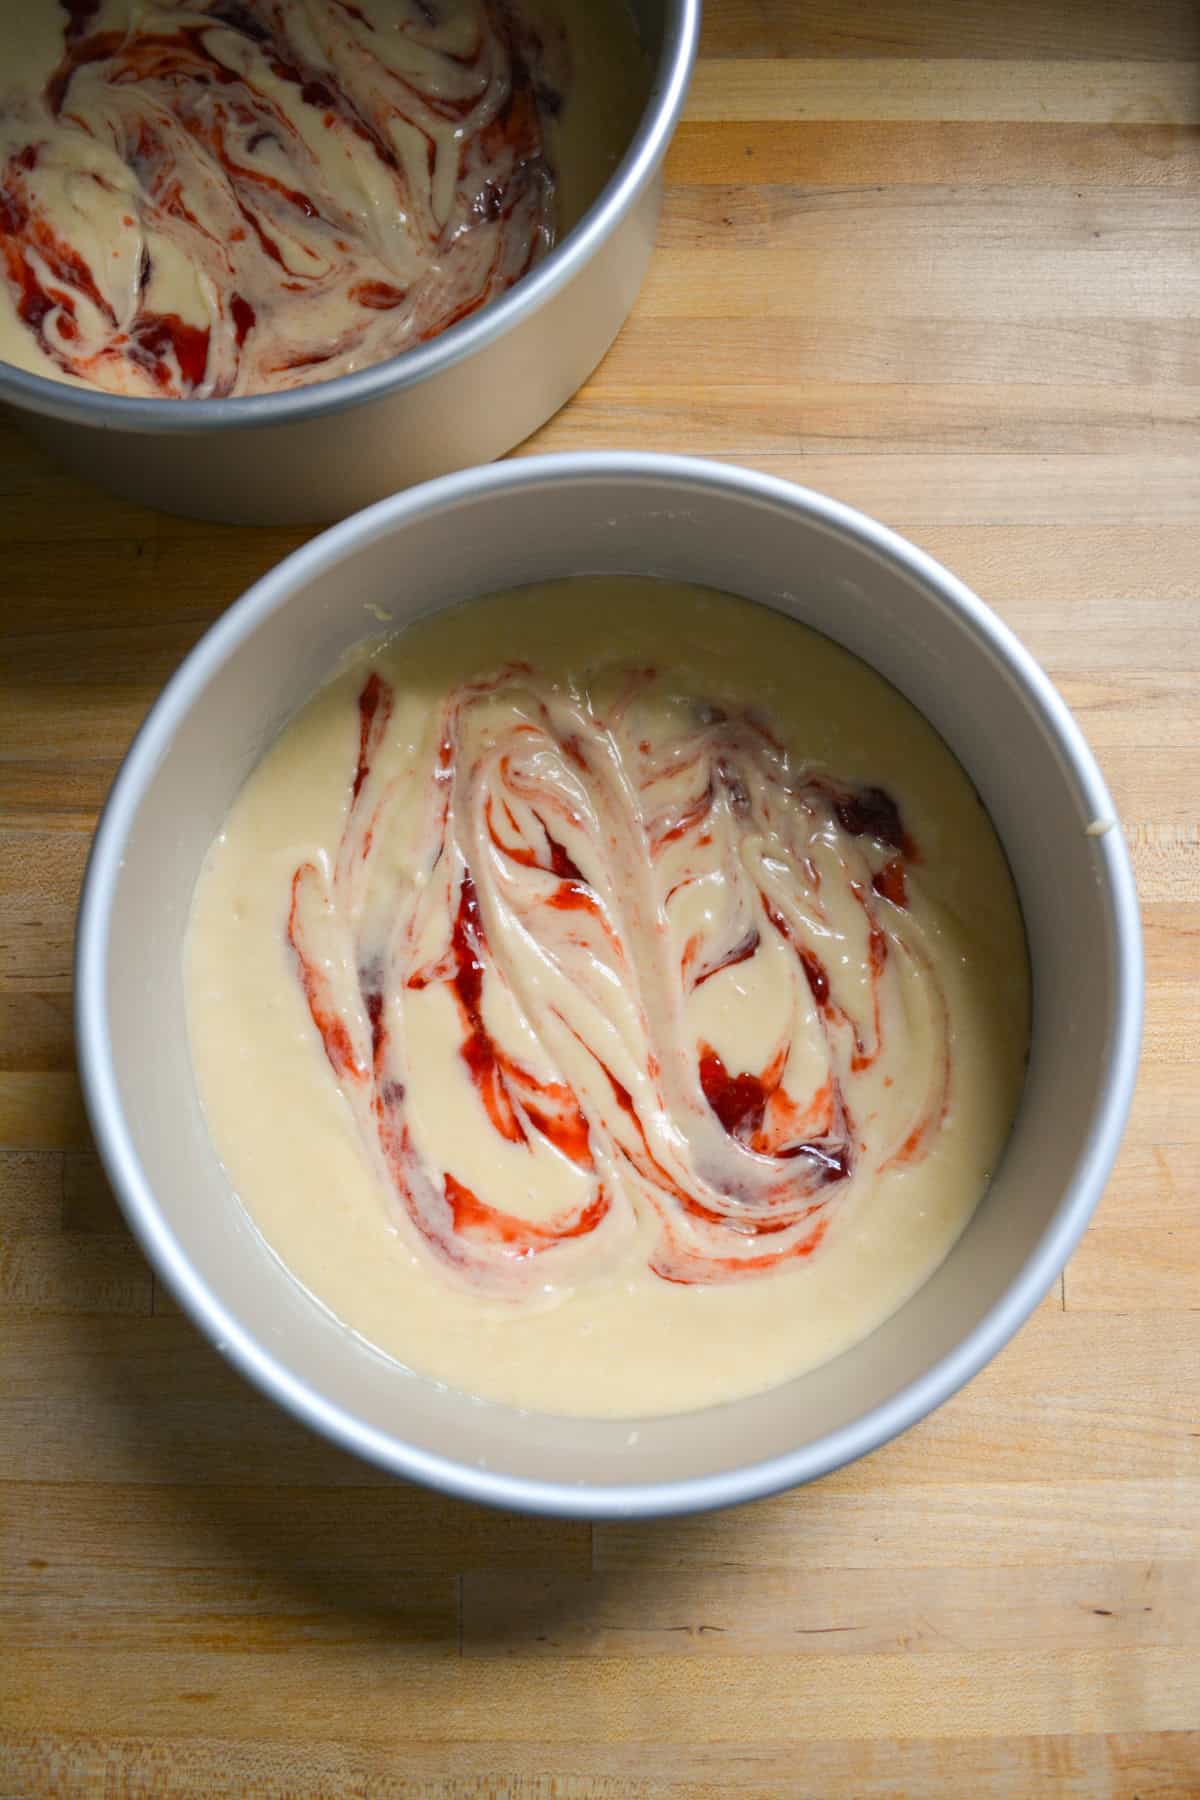 Cake batter portioned into an 8 inch round cake pan with strawberry jam swirled into the batter.